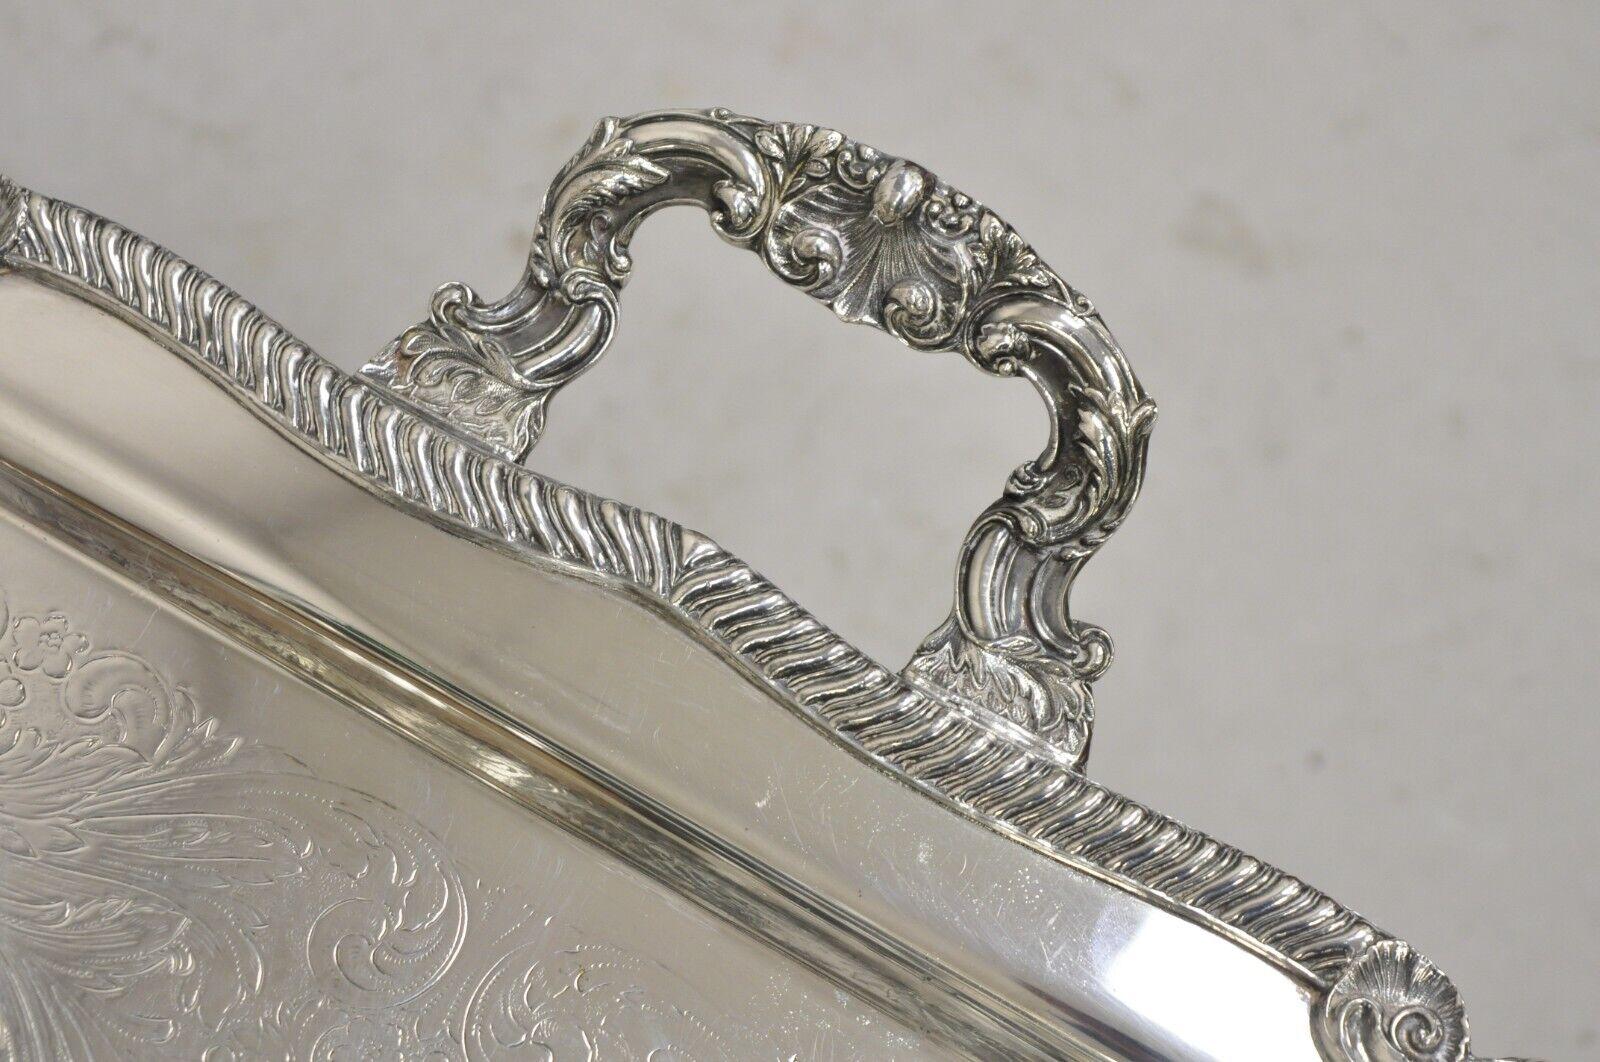 EPCA Poole Silver Co 400 Lancaster Rose Large Silver Plated Serving Platter Tray In Good Condition For Sale In Philadelphia, PA